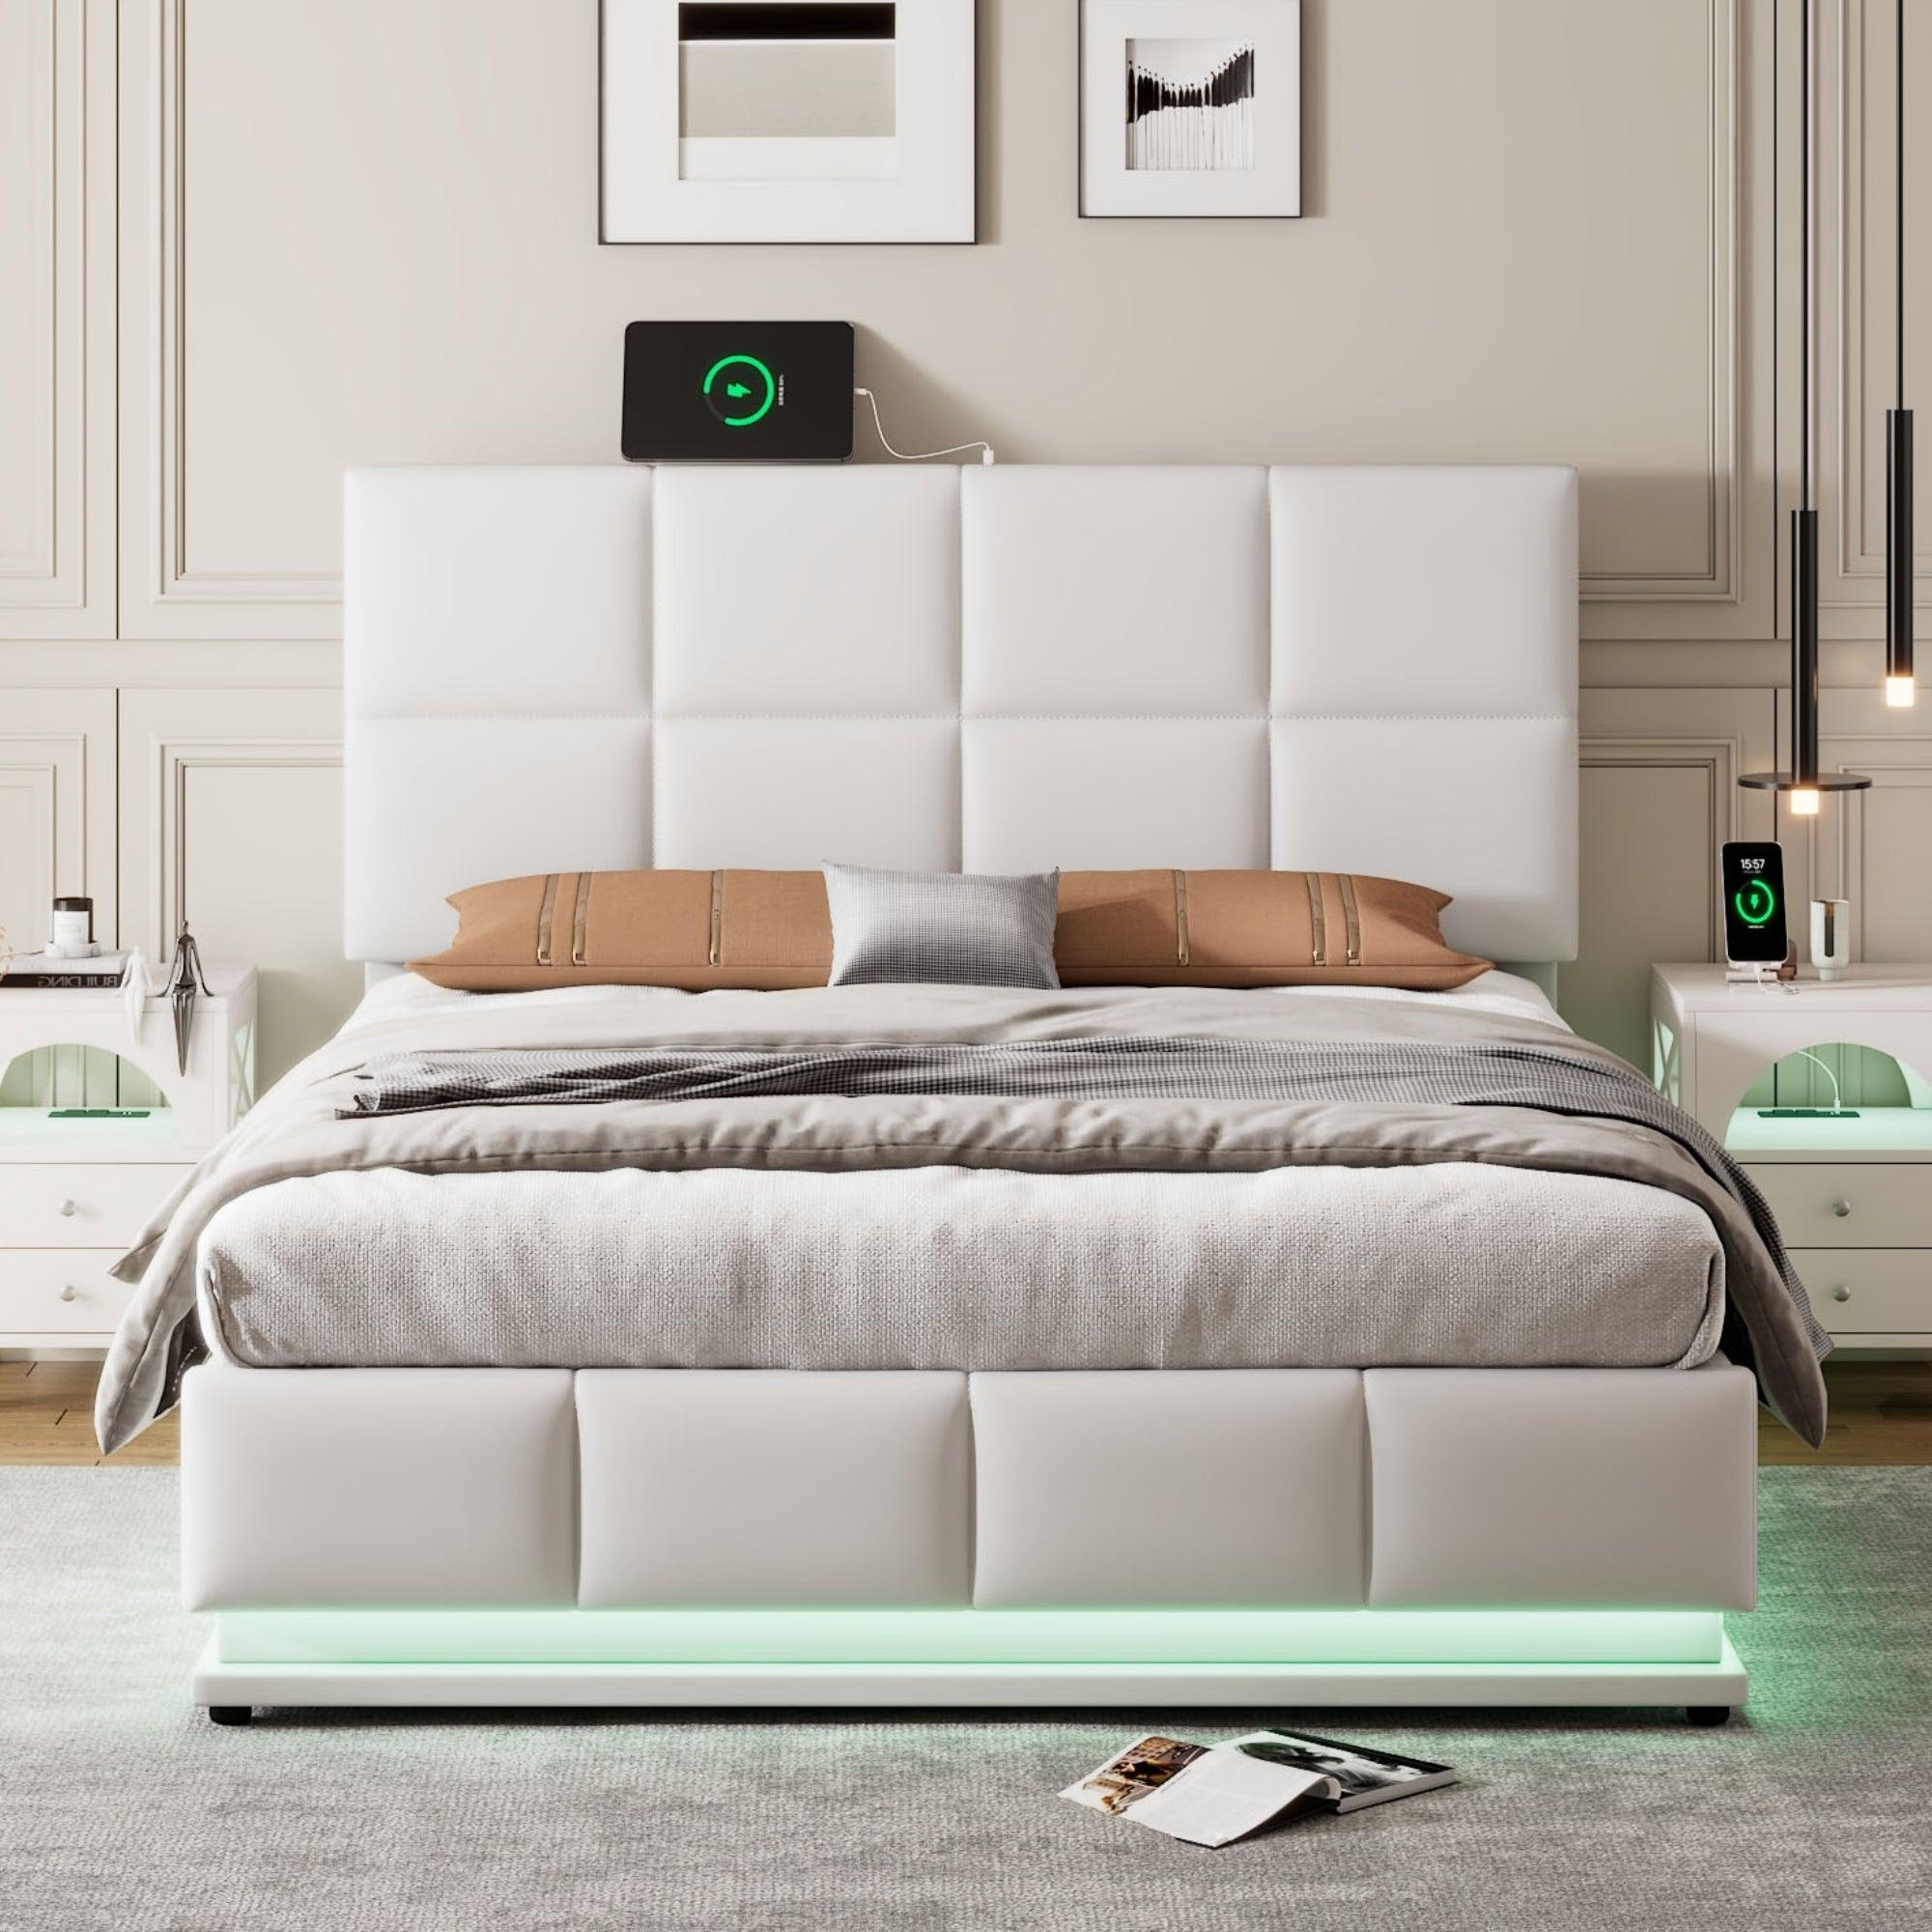 Full Size Tufted Upholstered Platform Bed with Hydraulic Storage System, PU Storage Bed with LED Lights and USB charger, White